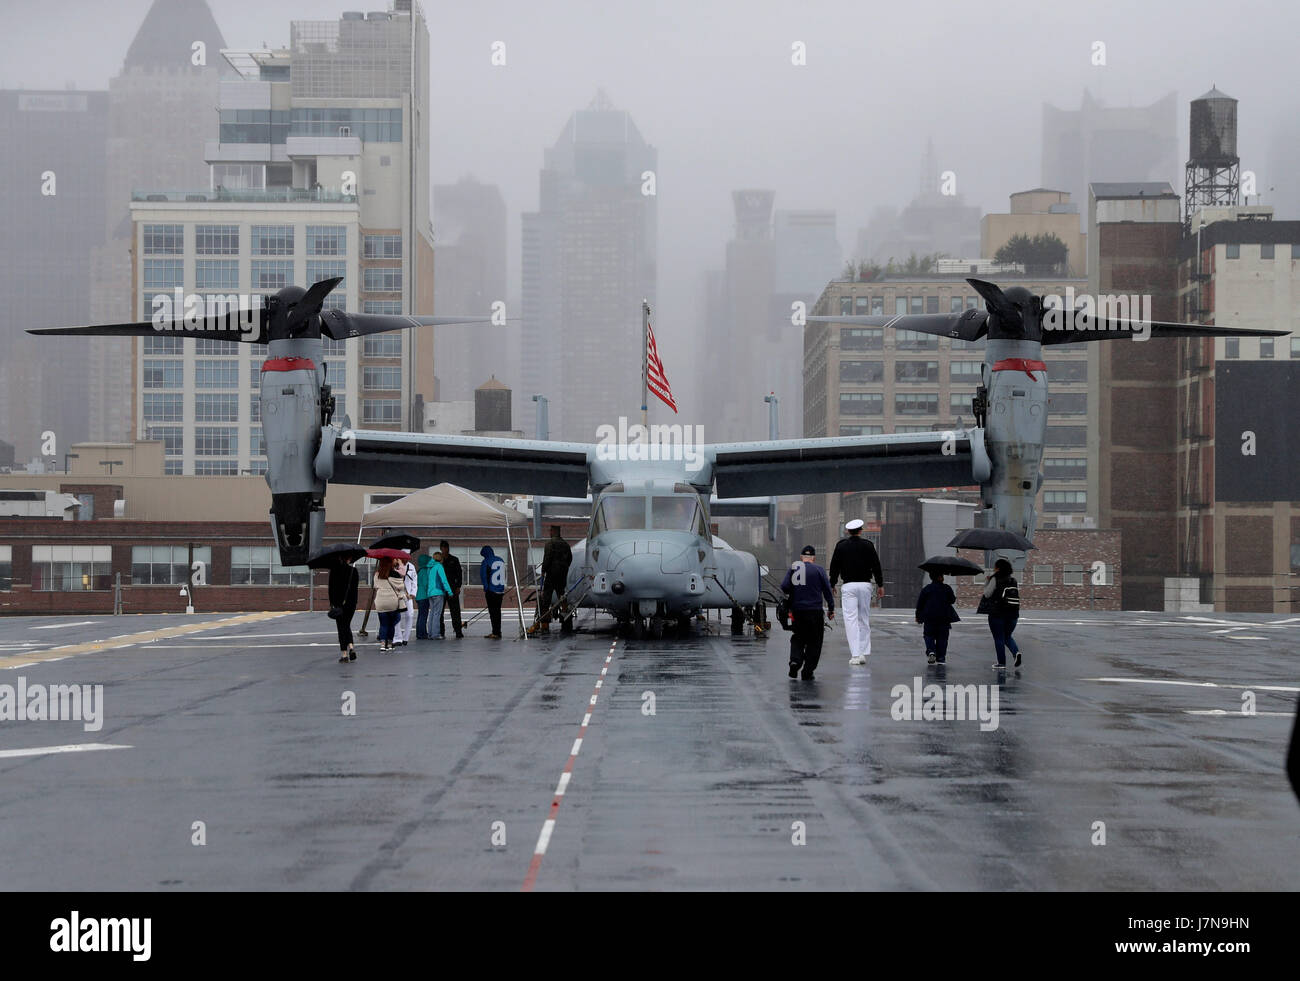 New York, USA. 25th May, 2017. People visit USS Kearsarge, a Wasp-class multipurpose amphibious assault ship, during an event of New York Fleet Week in New York, May 25, 2017. The New York Fleet Week is held from May 24 to May 30. Credit: Wang Ying/Xinhua/Alamy Live News Stock Photo